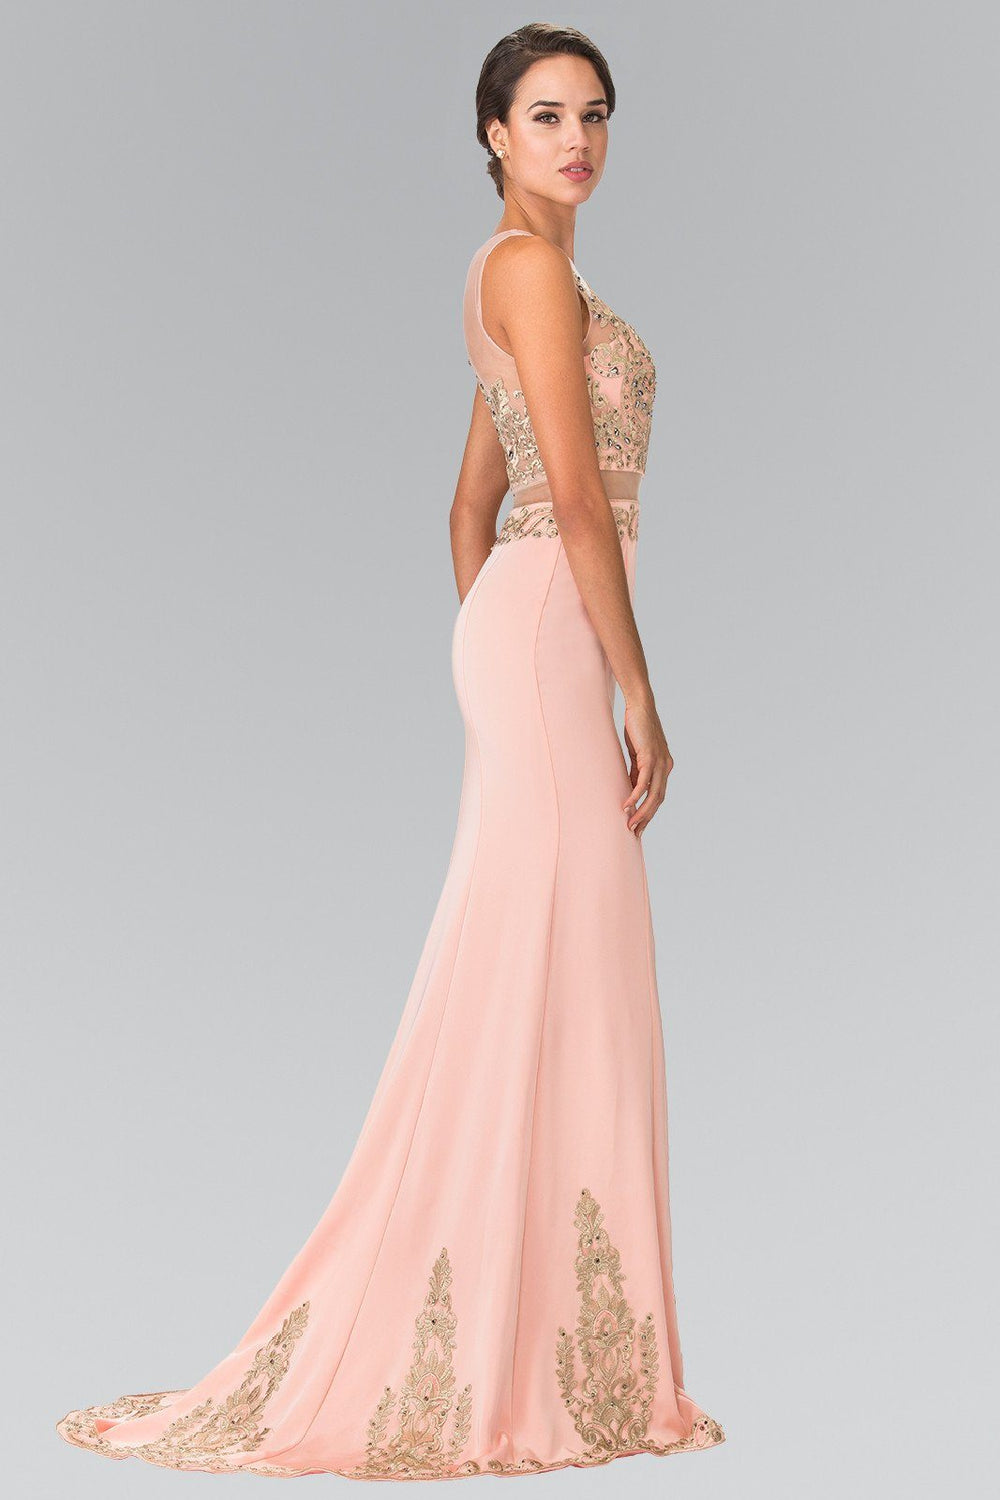 Mock Two-Piece Embroidered Illusion Dress by Elizabeth K GL2248-Long Formal Dresses-ABC Fashion